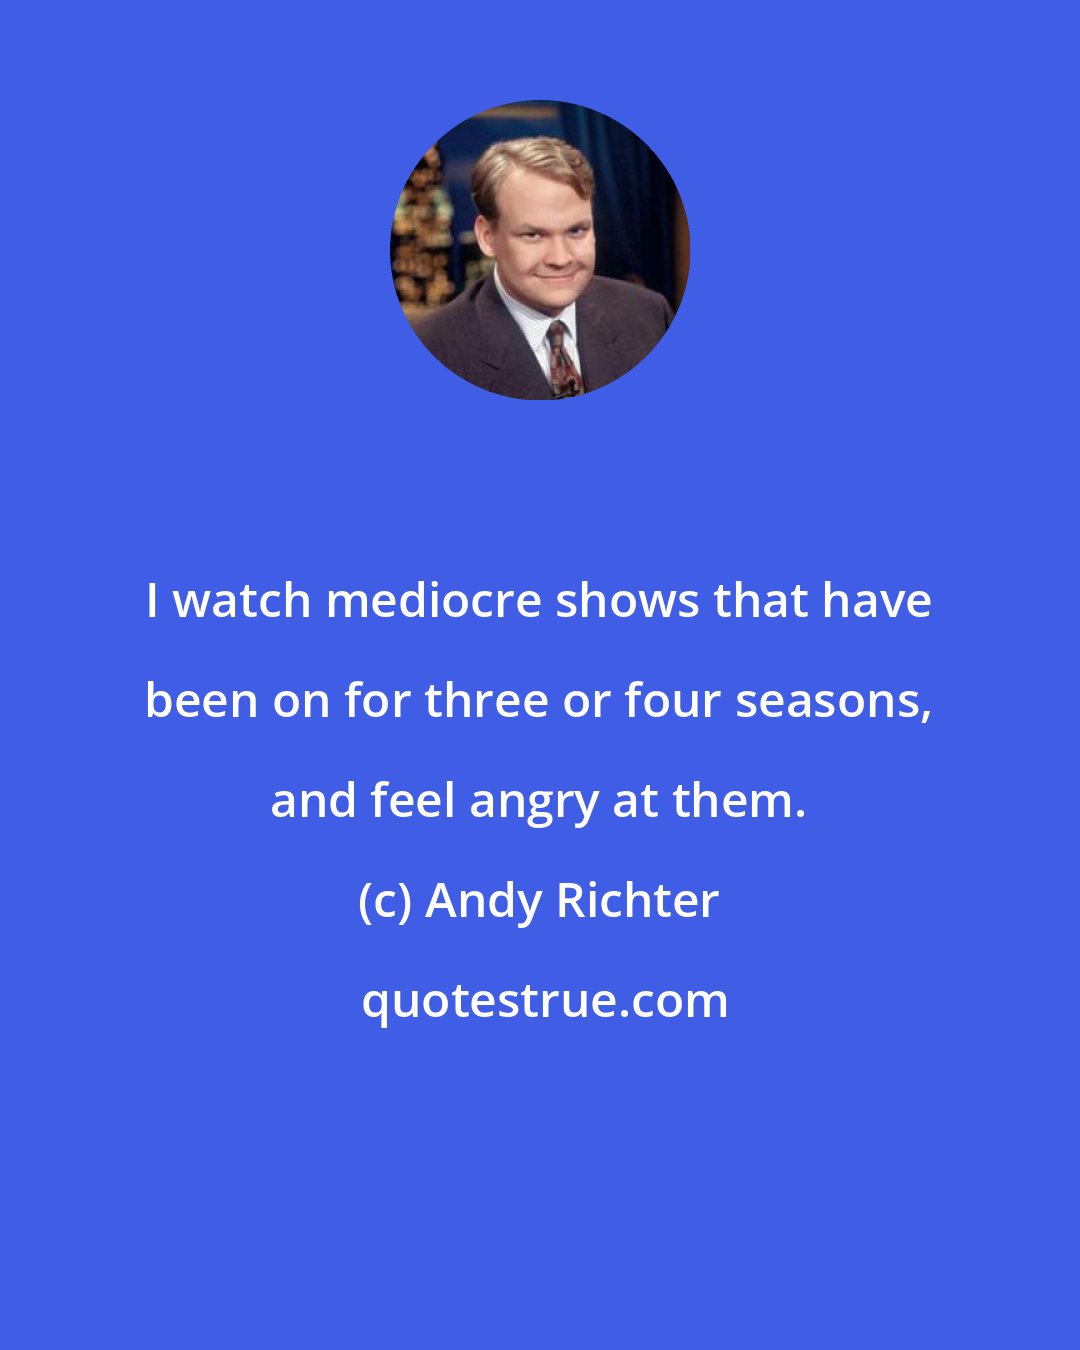 Andy Richter: I watch mediocre shows that have been on for three or four seasons, and feel angry at them.